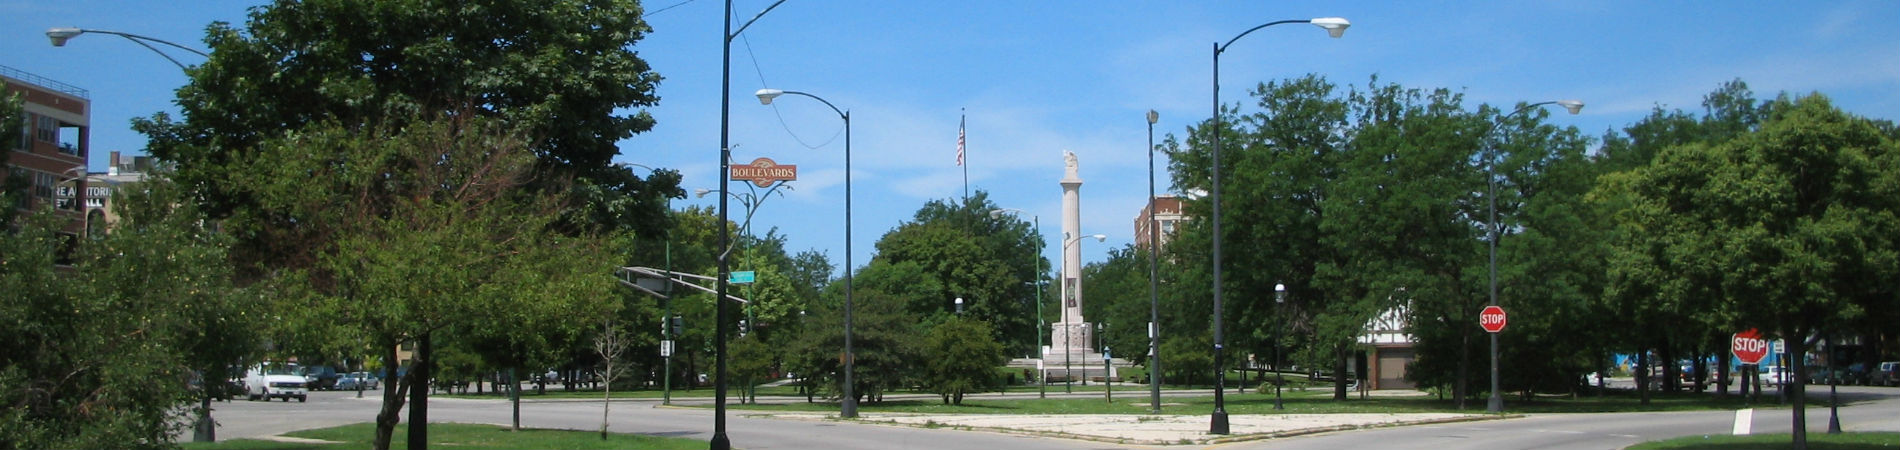 things to do in logan square chicago